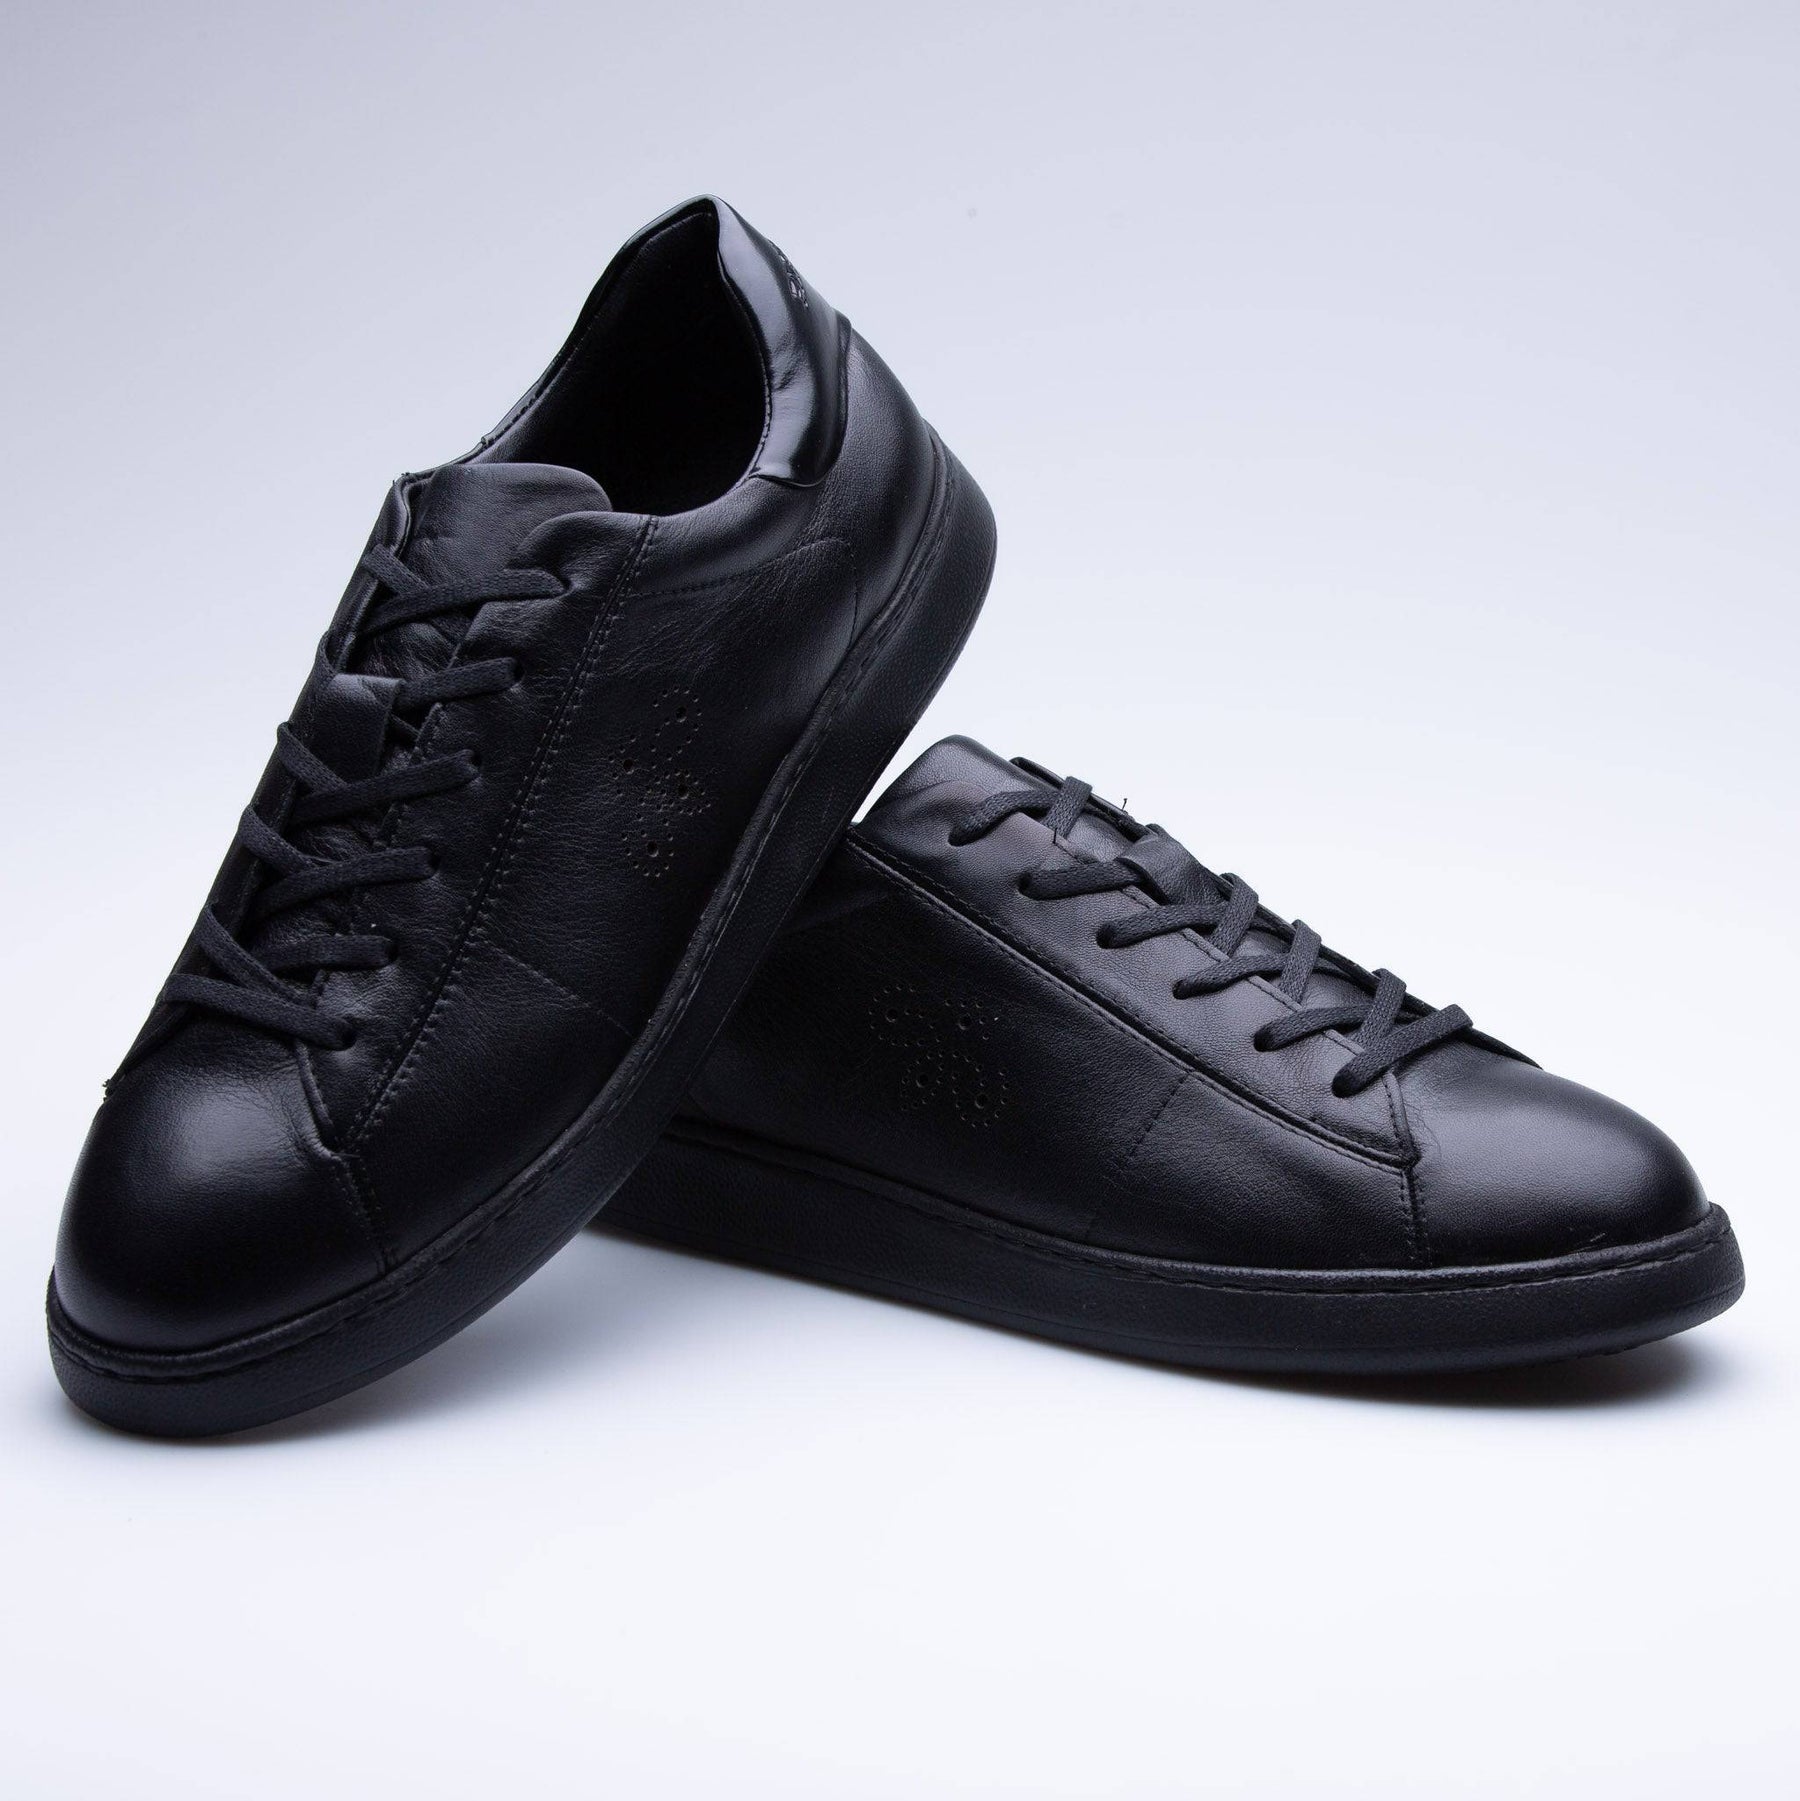 Premium Daily Leather Sneakers